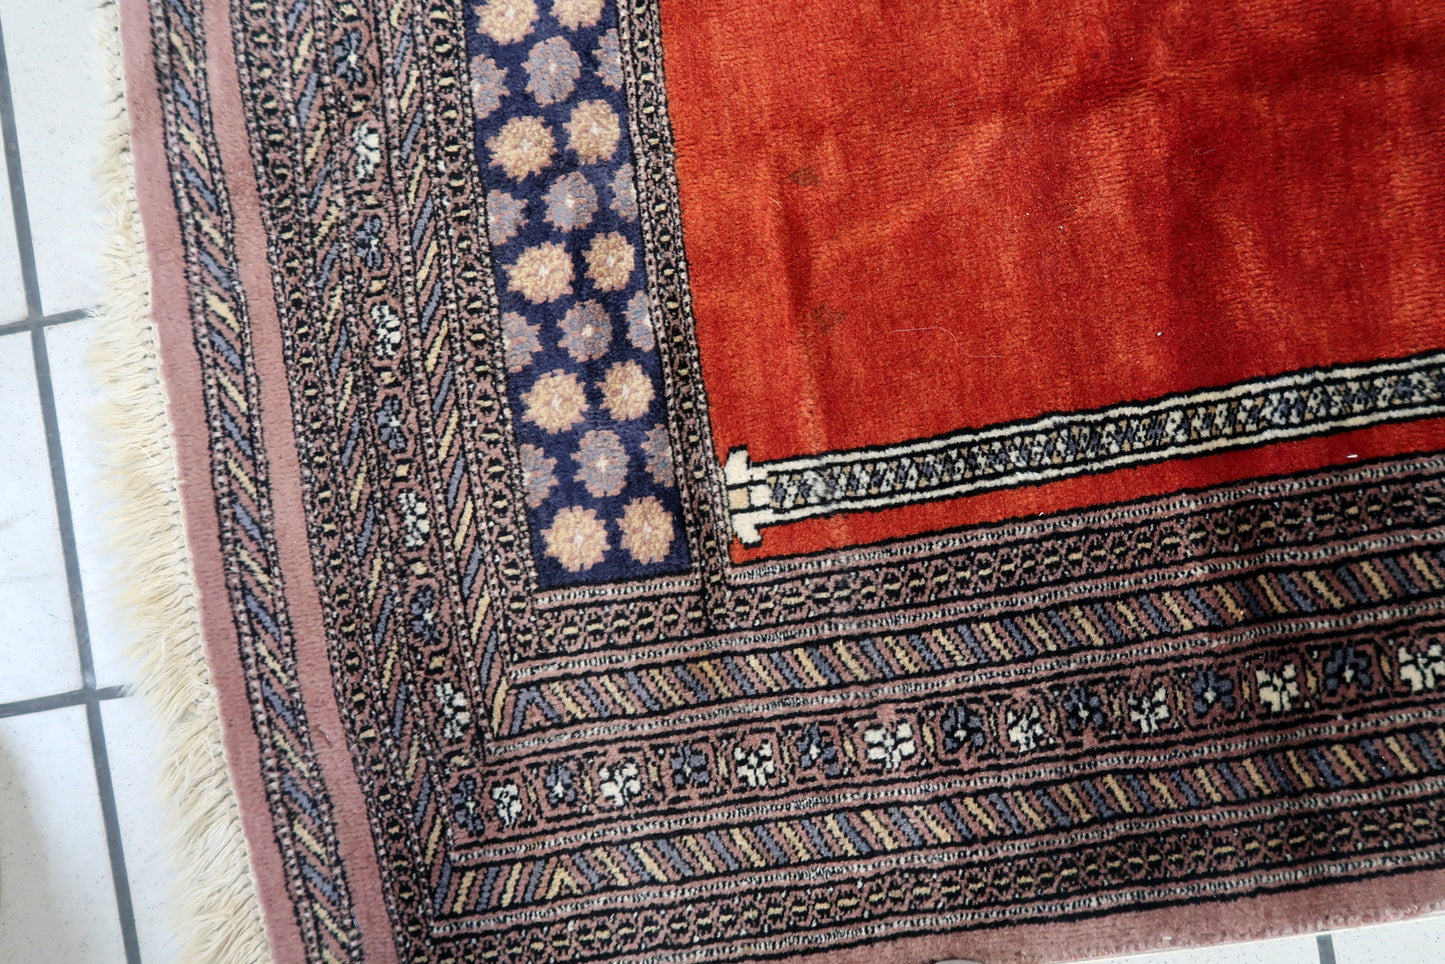 Close-up of the innermost thin white border providing a subtle contrast